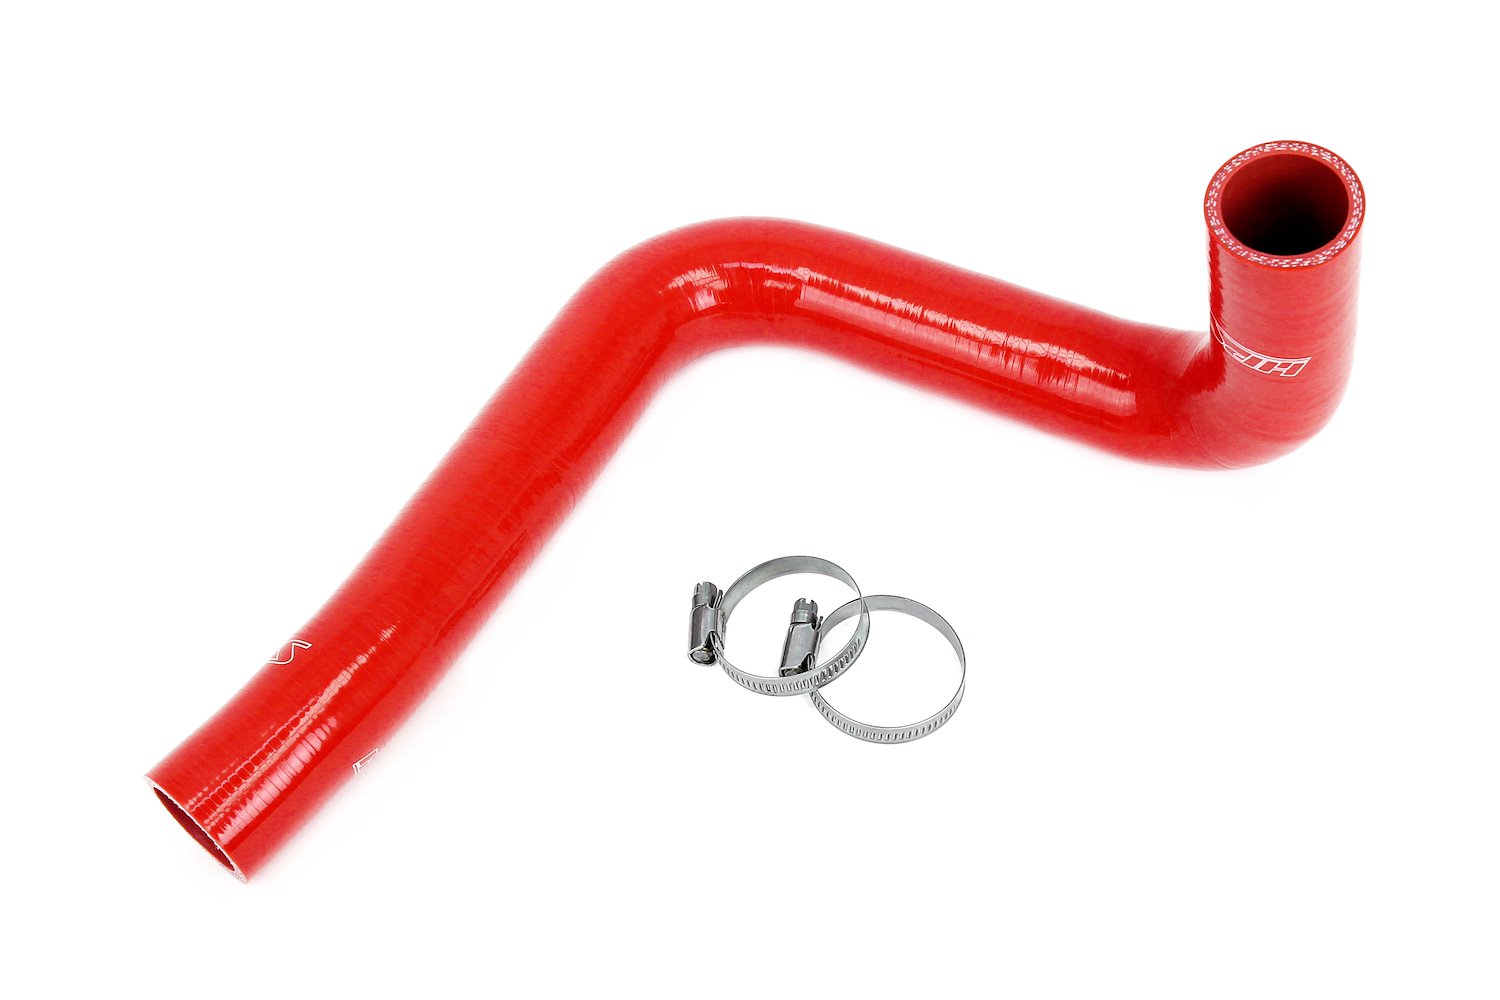 57-2047-RED Radiator Hose Kit, 3-Ply Reinforced Silicone, Replaces Rubber Lower Radiator Coolant Hose.